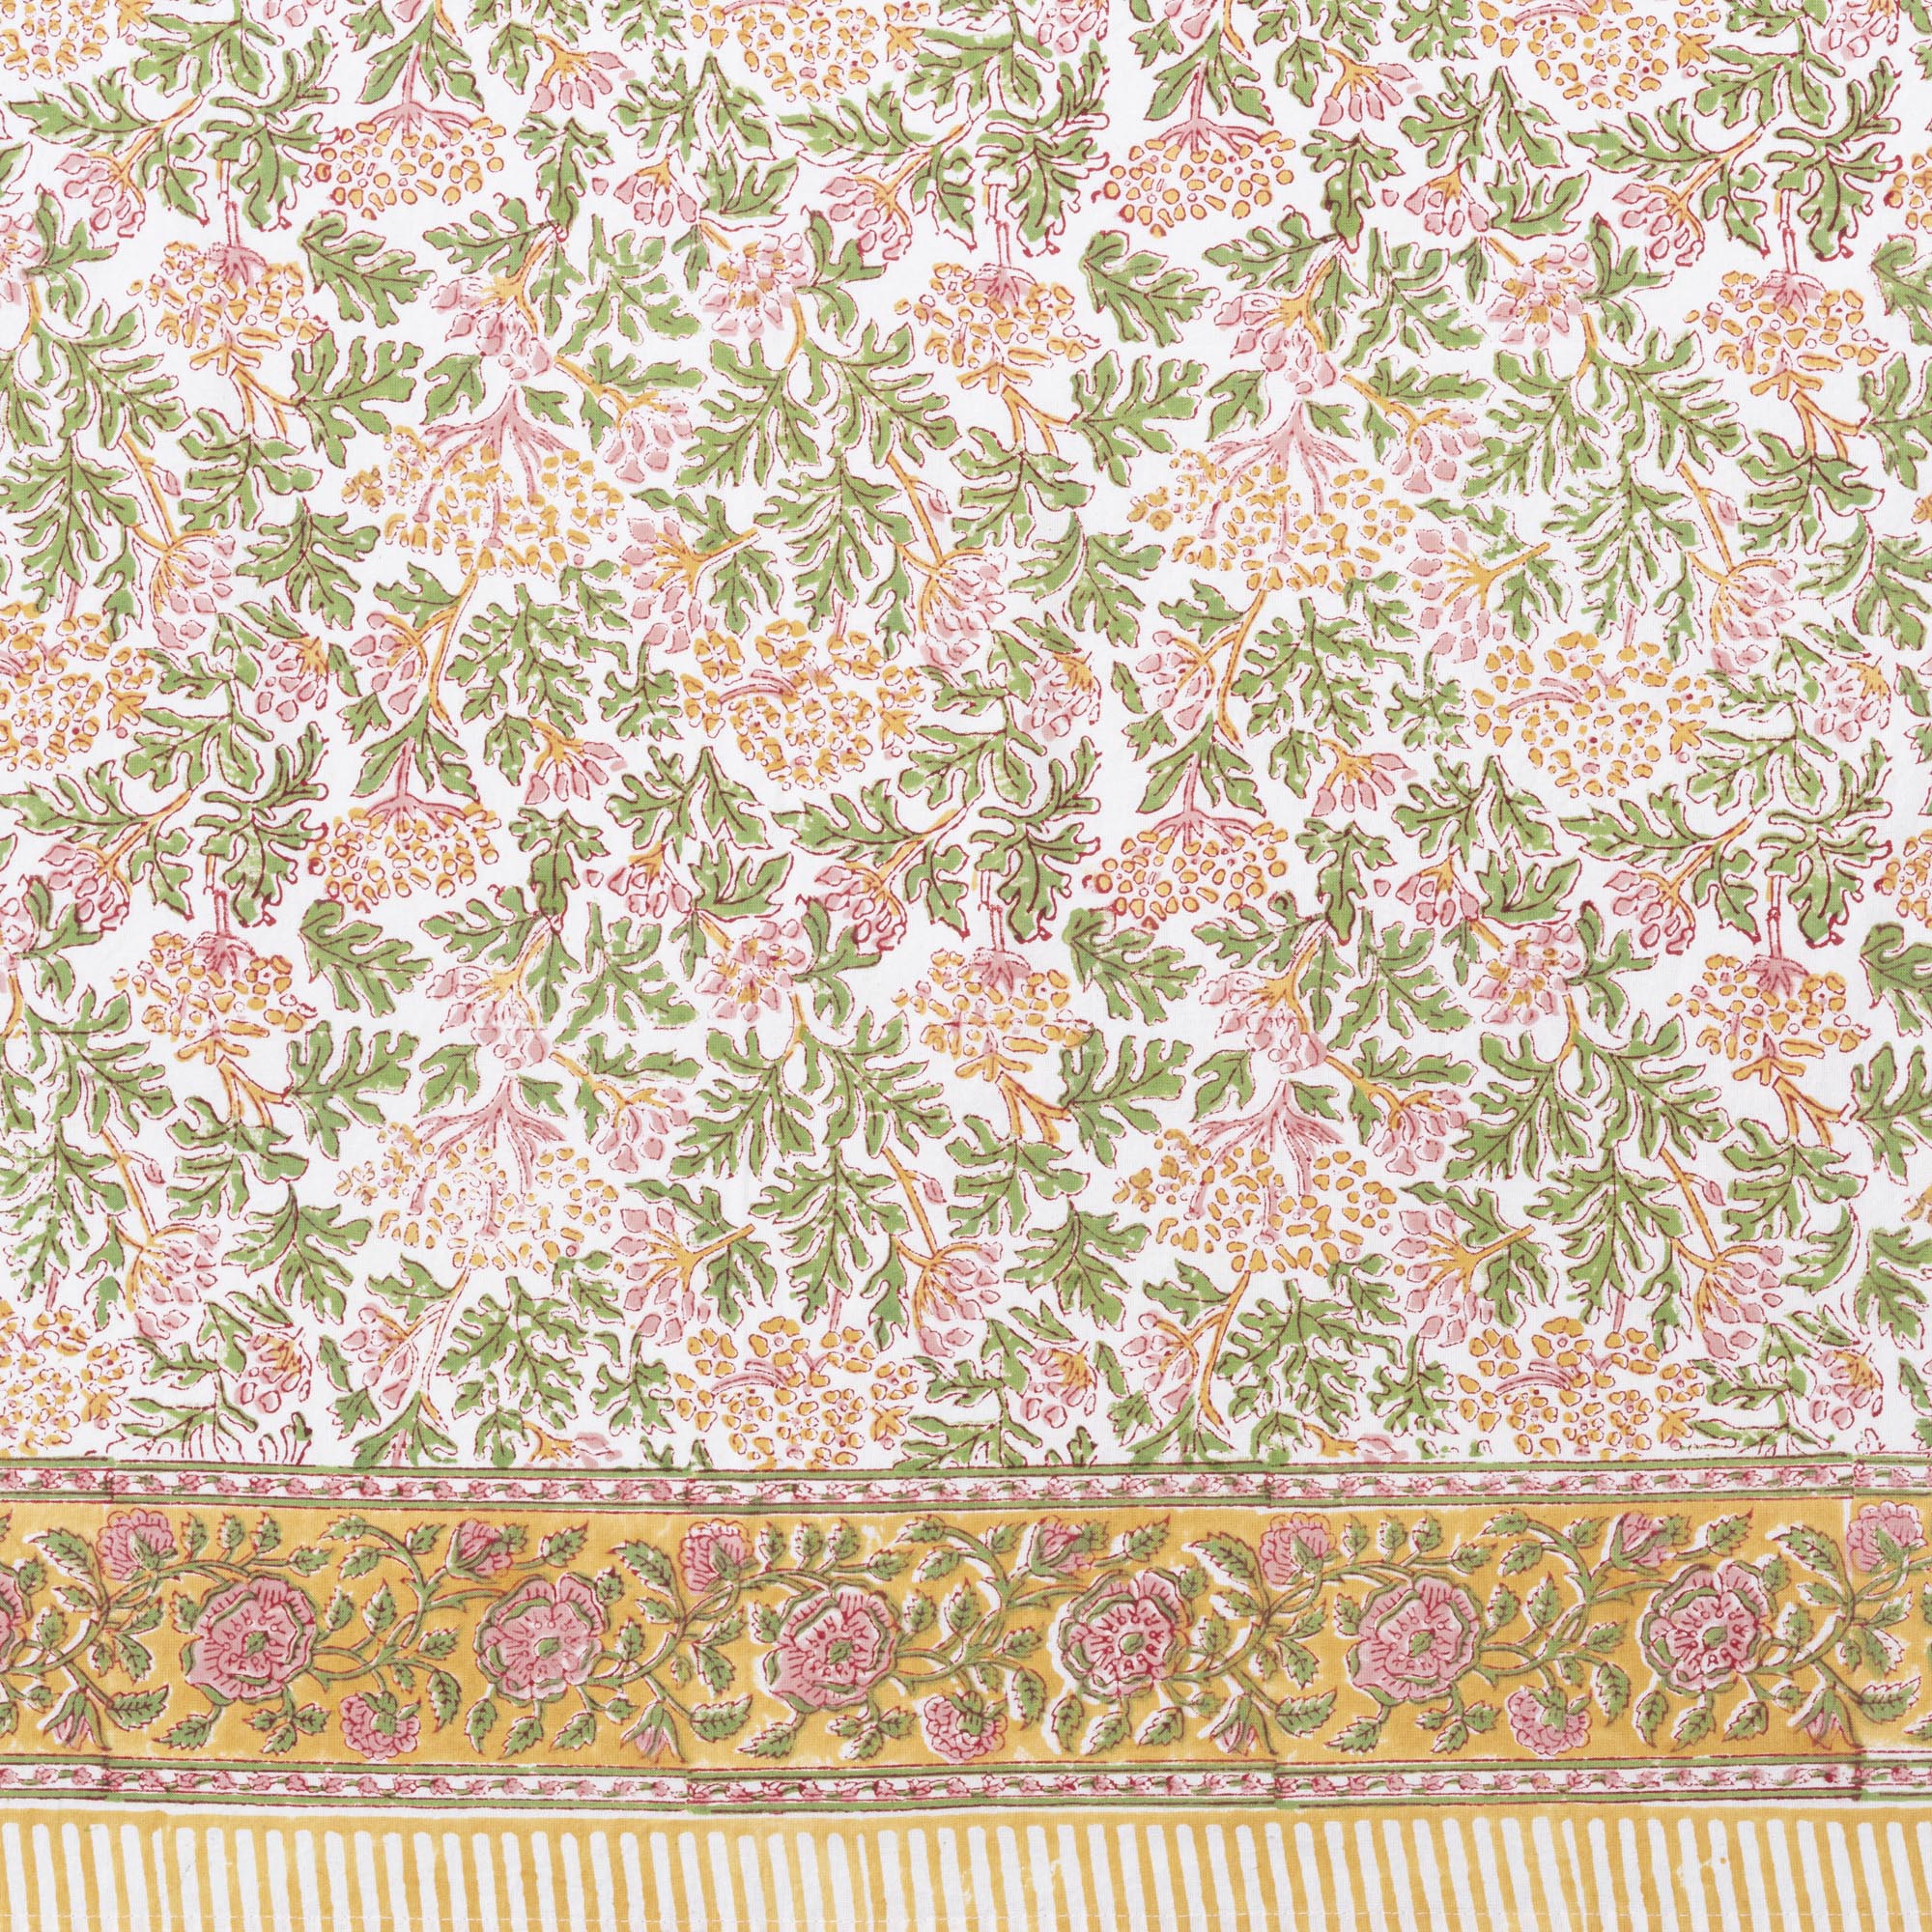 KELPIE TABLECLOTH IN PINK-GREEN